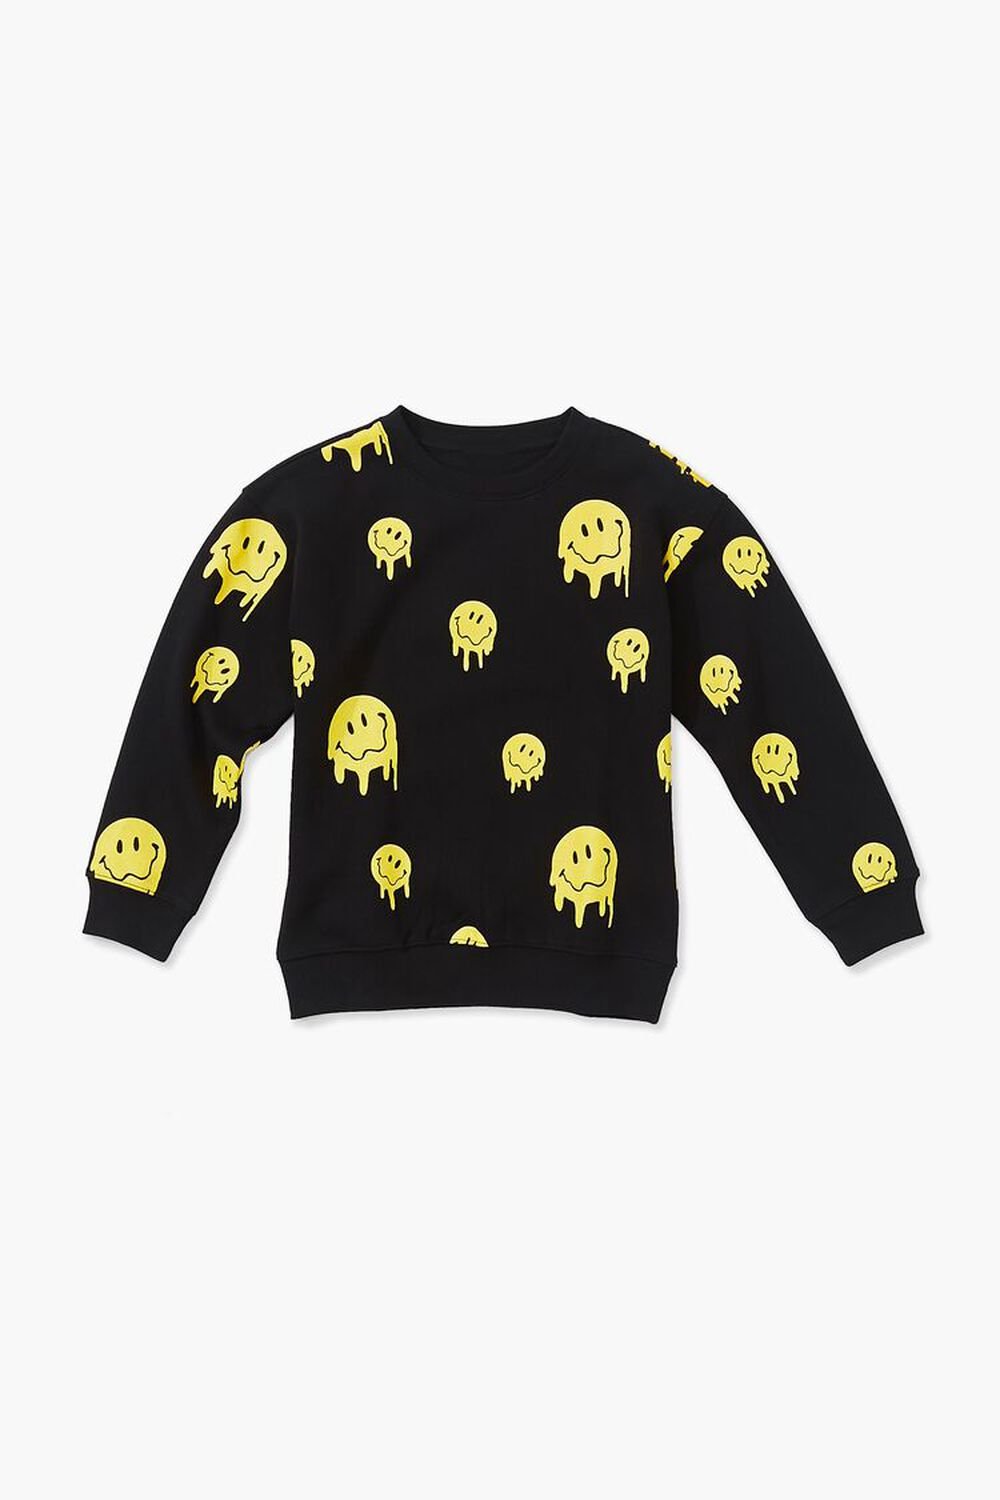 BLACK/YELLOW Kids Happy Face Pullover (Girls + Boys), image 1